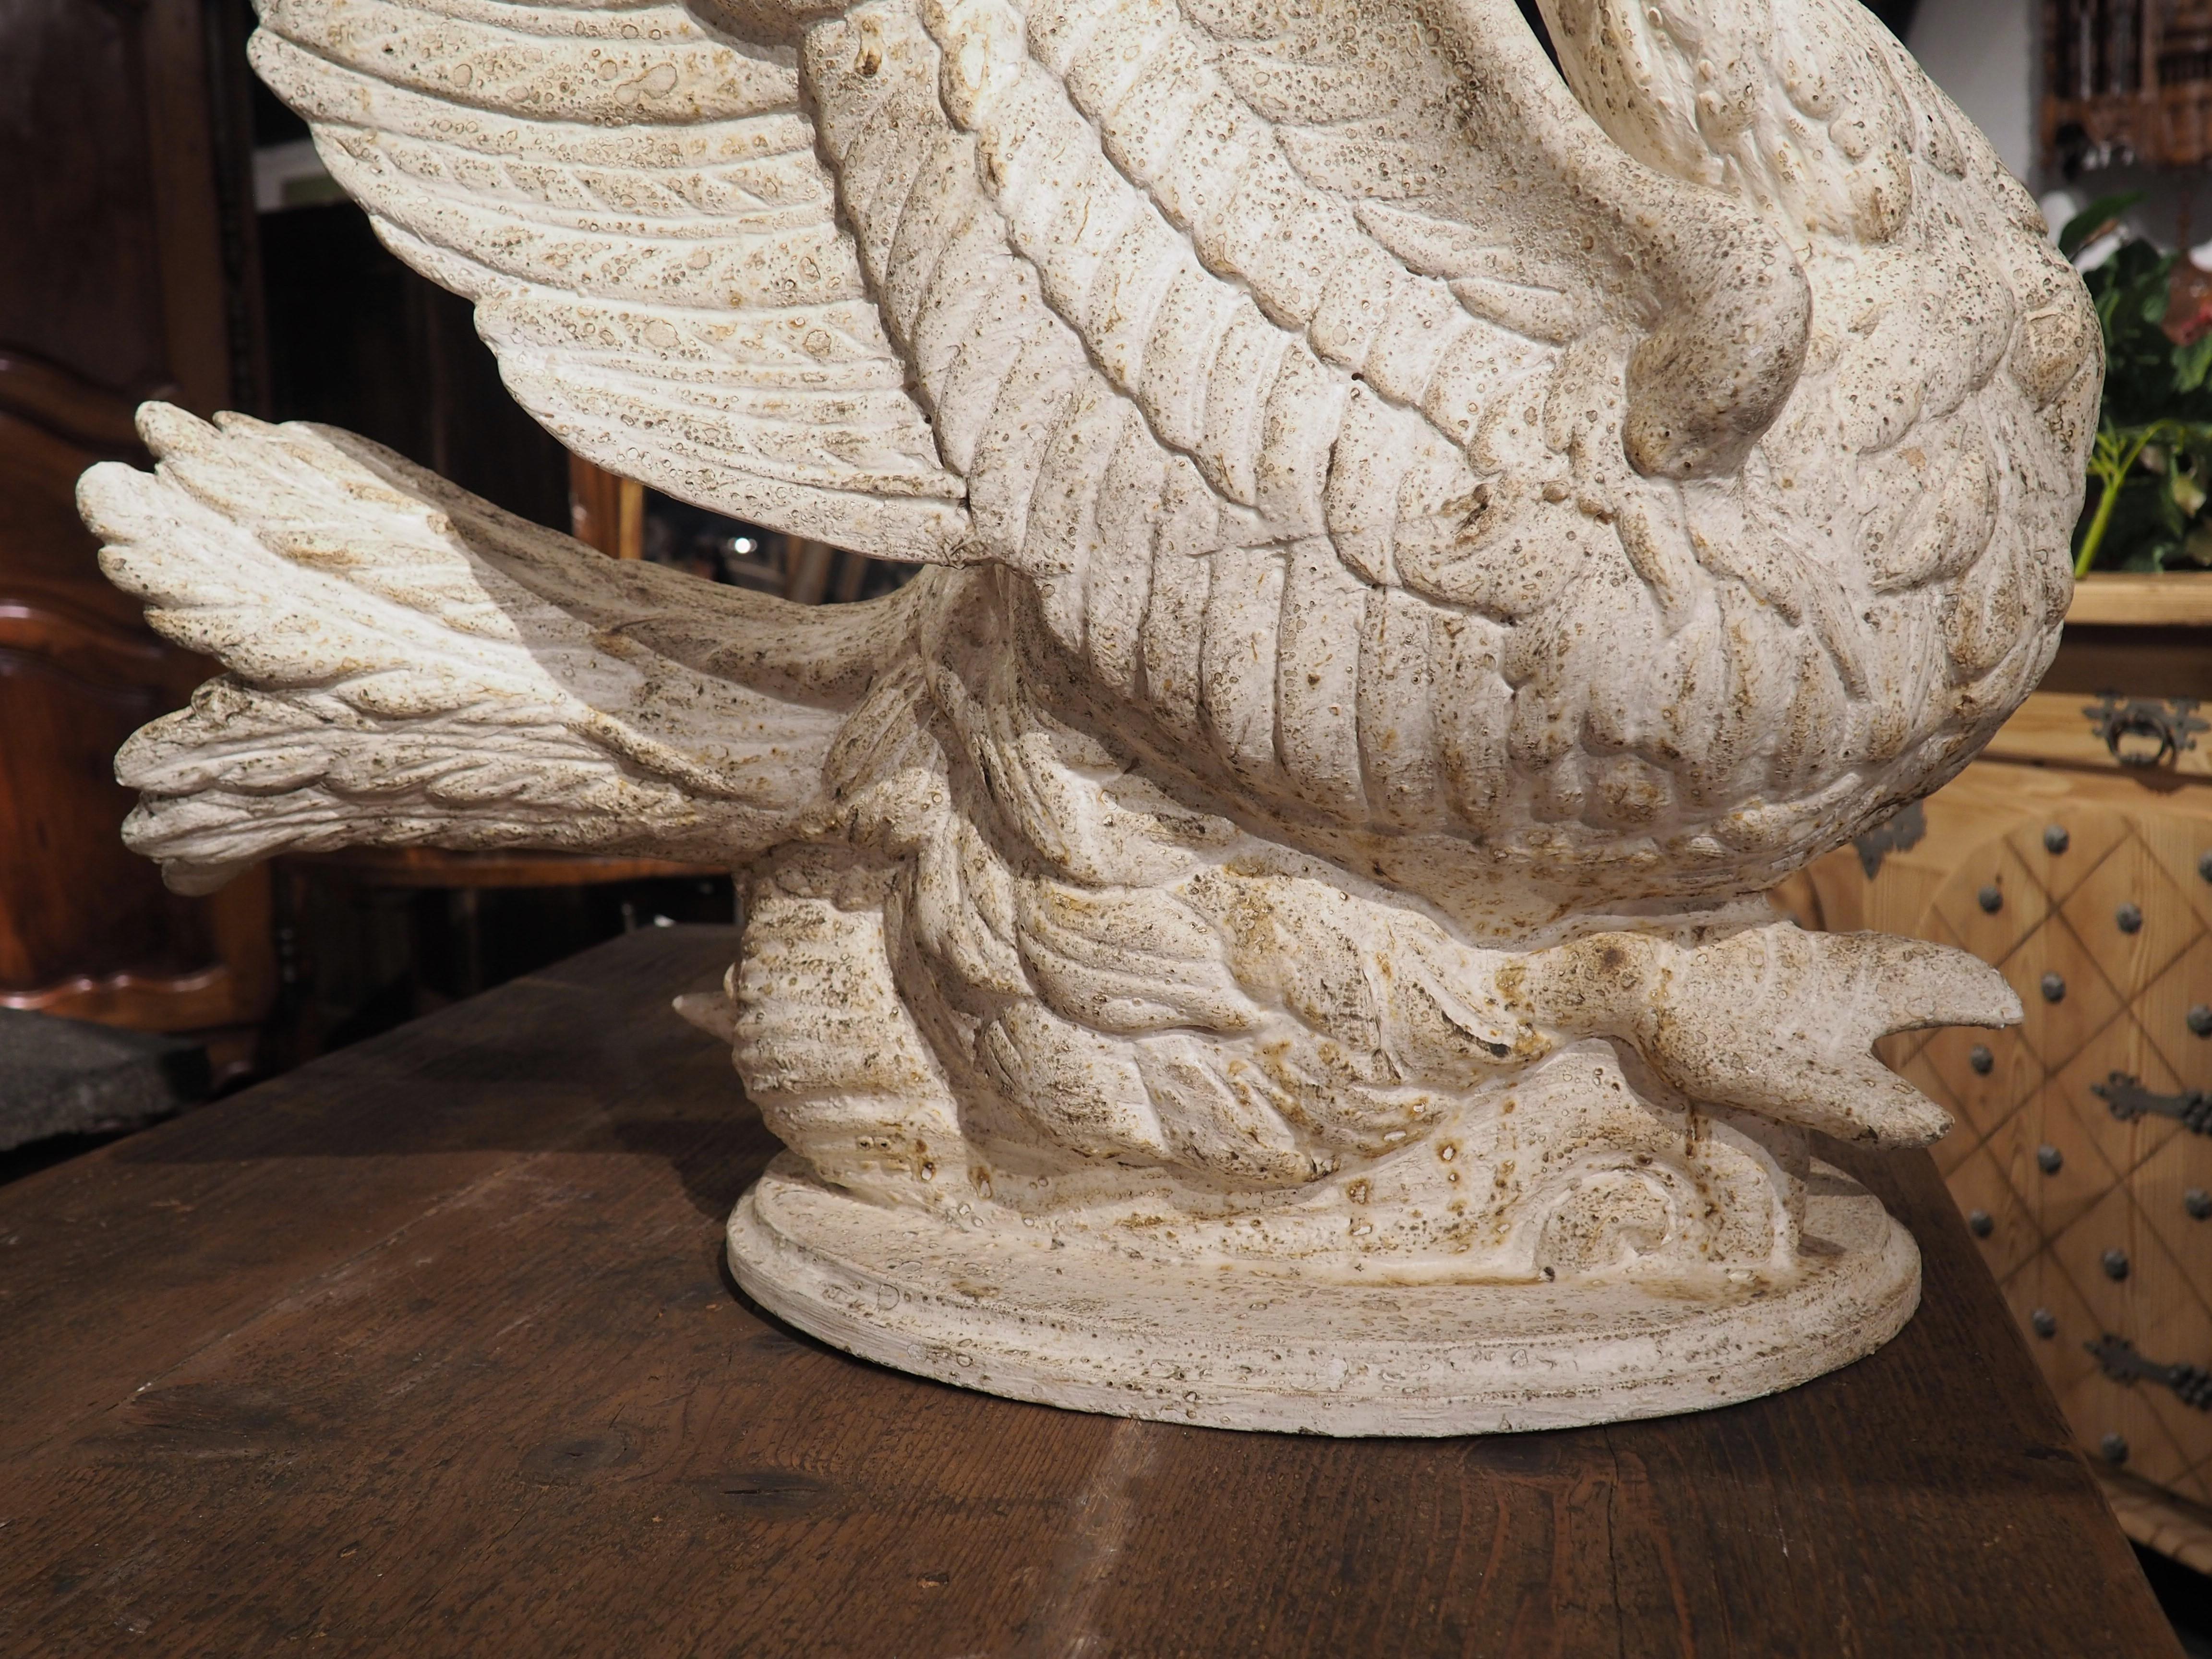 Hand-carved in Italy, this fantastic pair of large carved and white painted wooden swan planters are every bit as graceful as the actual bird they depict. Based on the curved neck and downward pointing bill, this is most likely a mute swan, which is